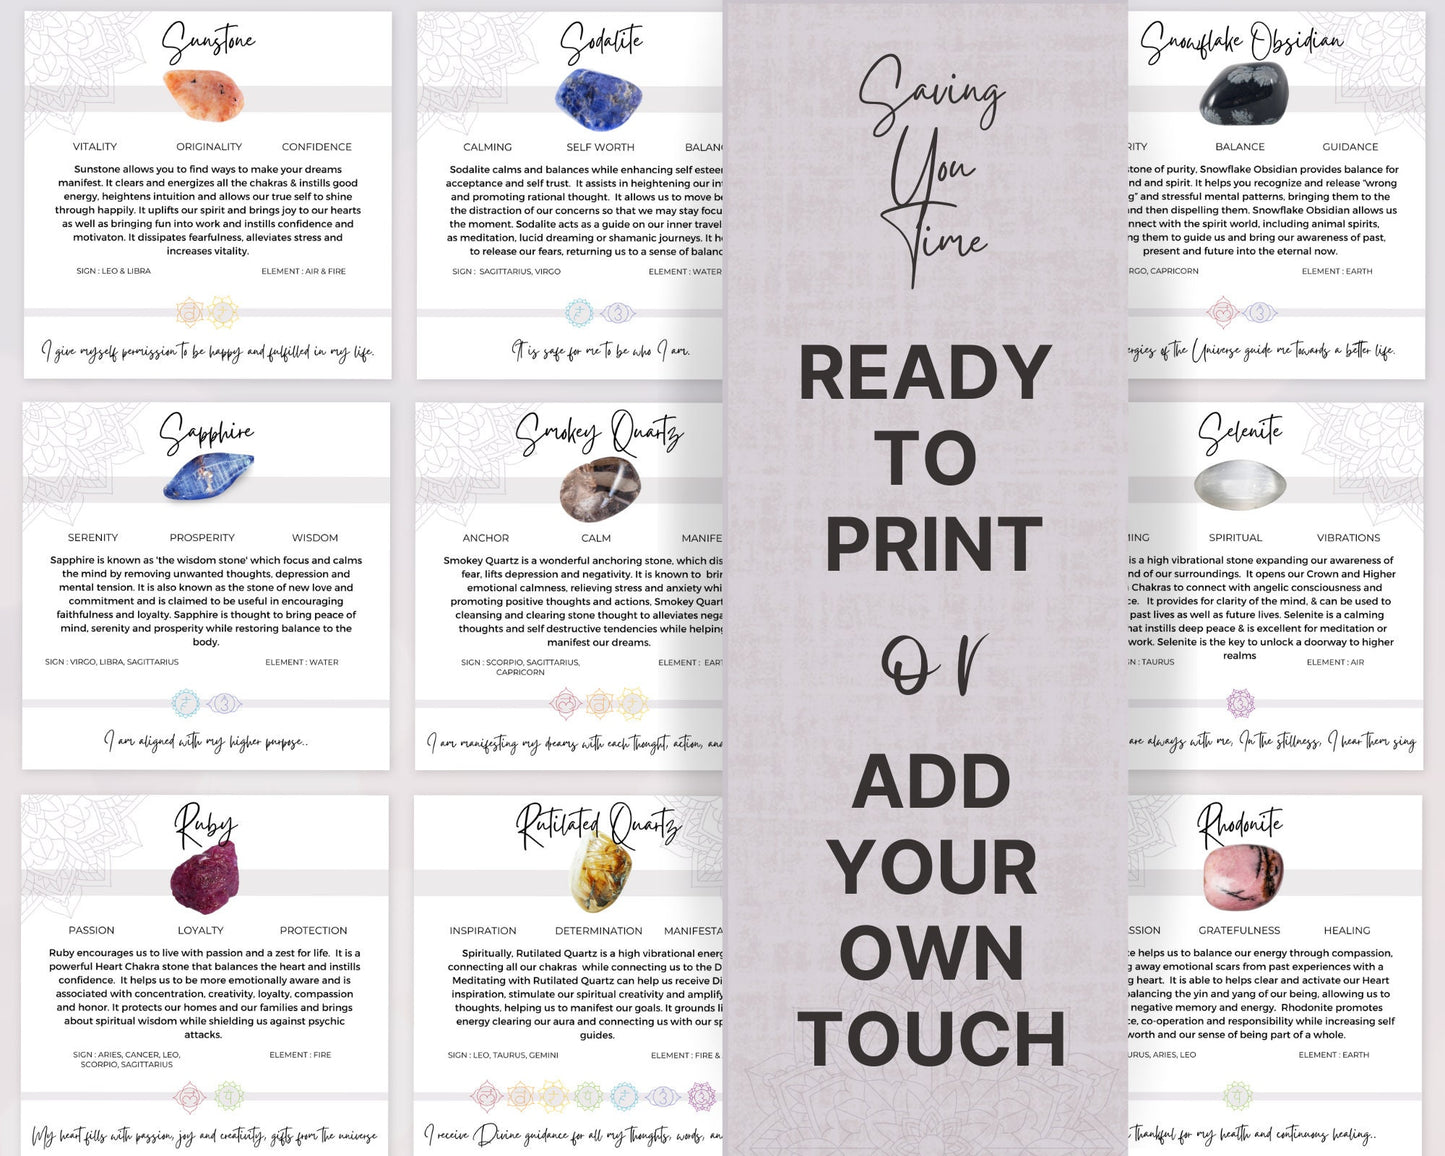 75 Printable Crystal Meaning Cards with Affirmations, Editable Crystal & Gemstone Cards, Crystal Reference with Crystal Meanings and Chakras